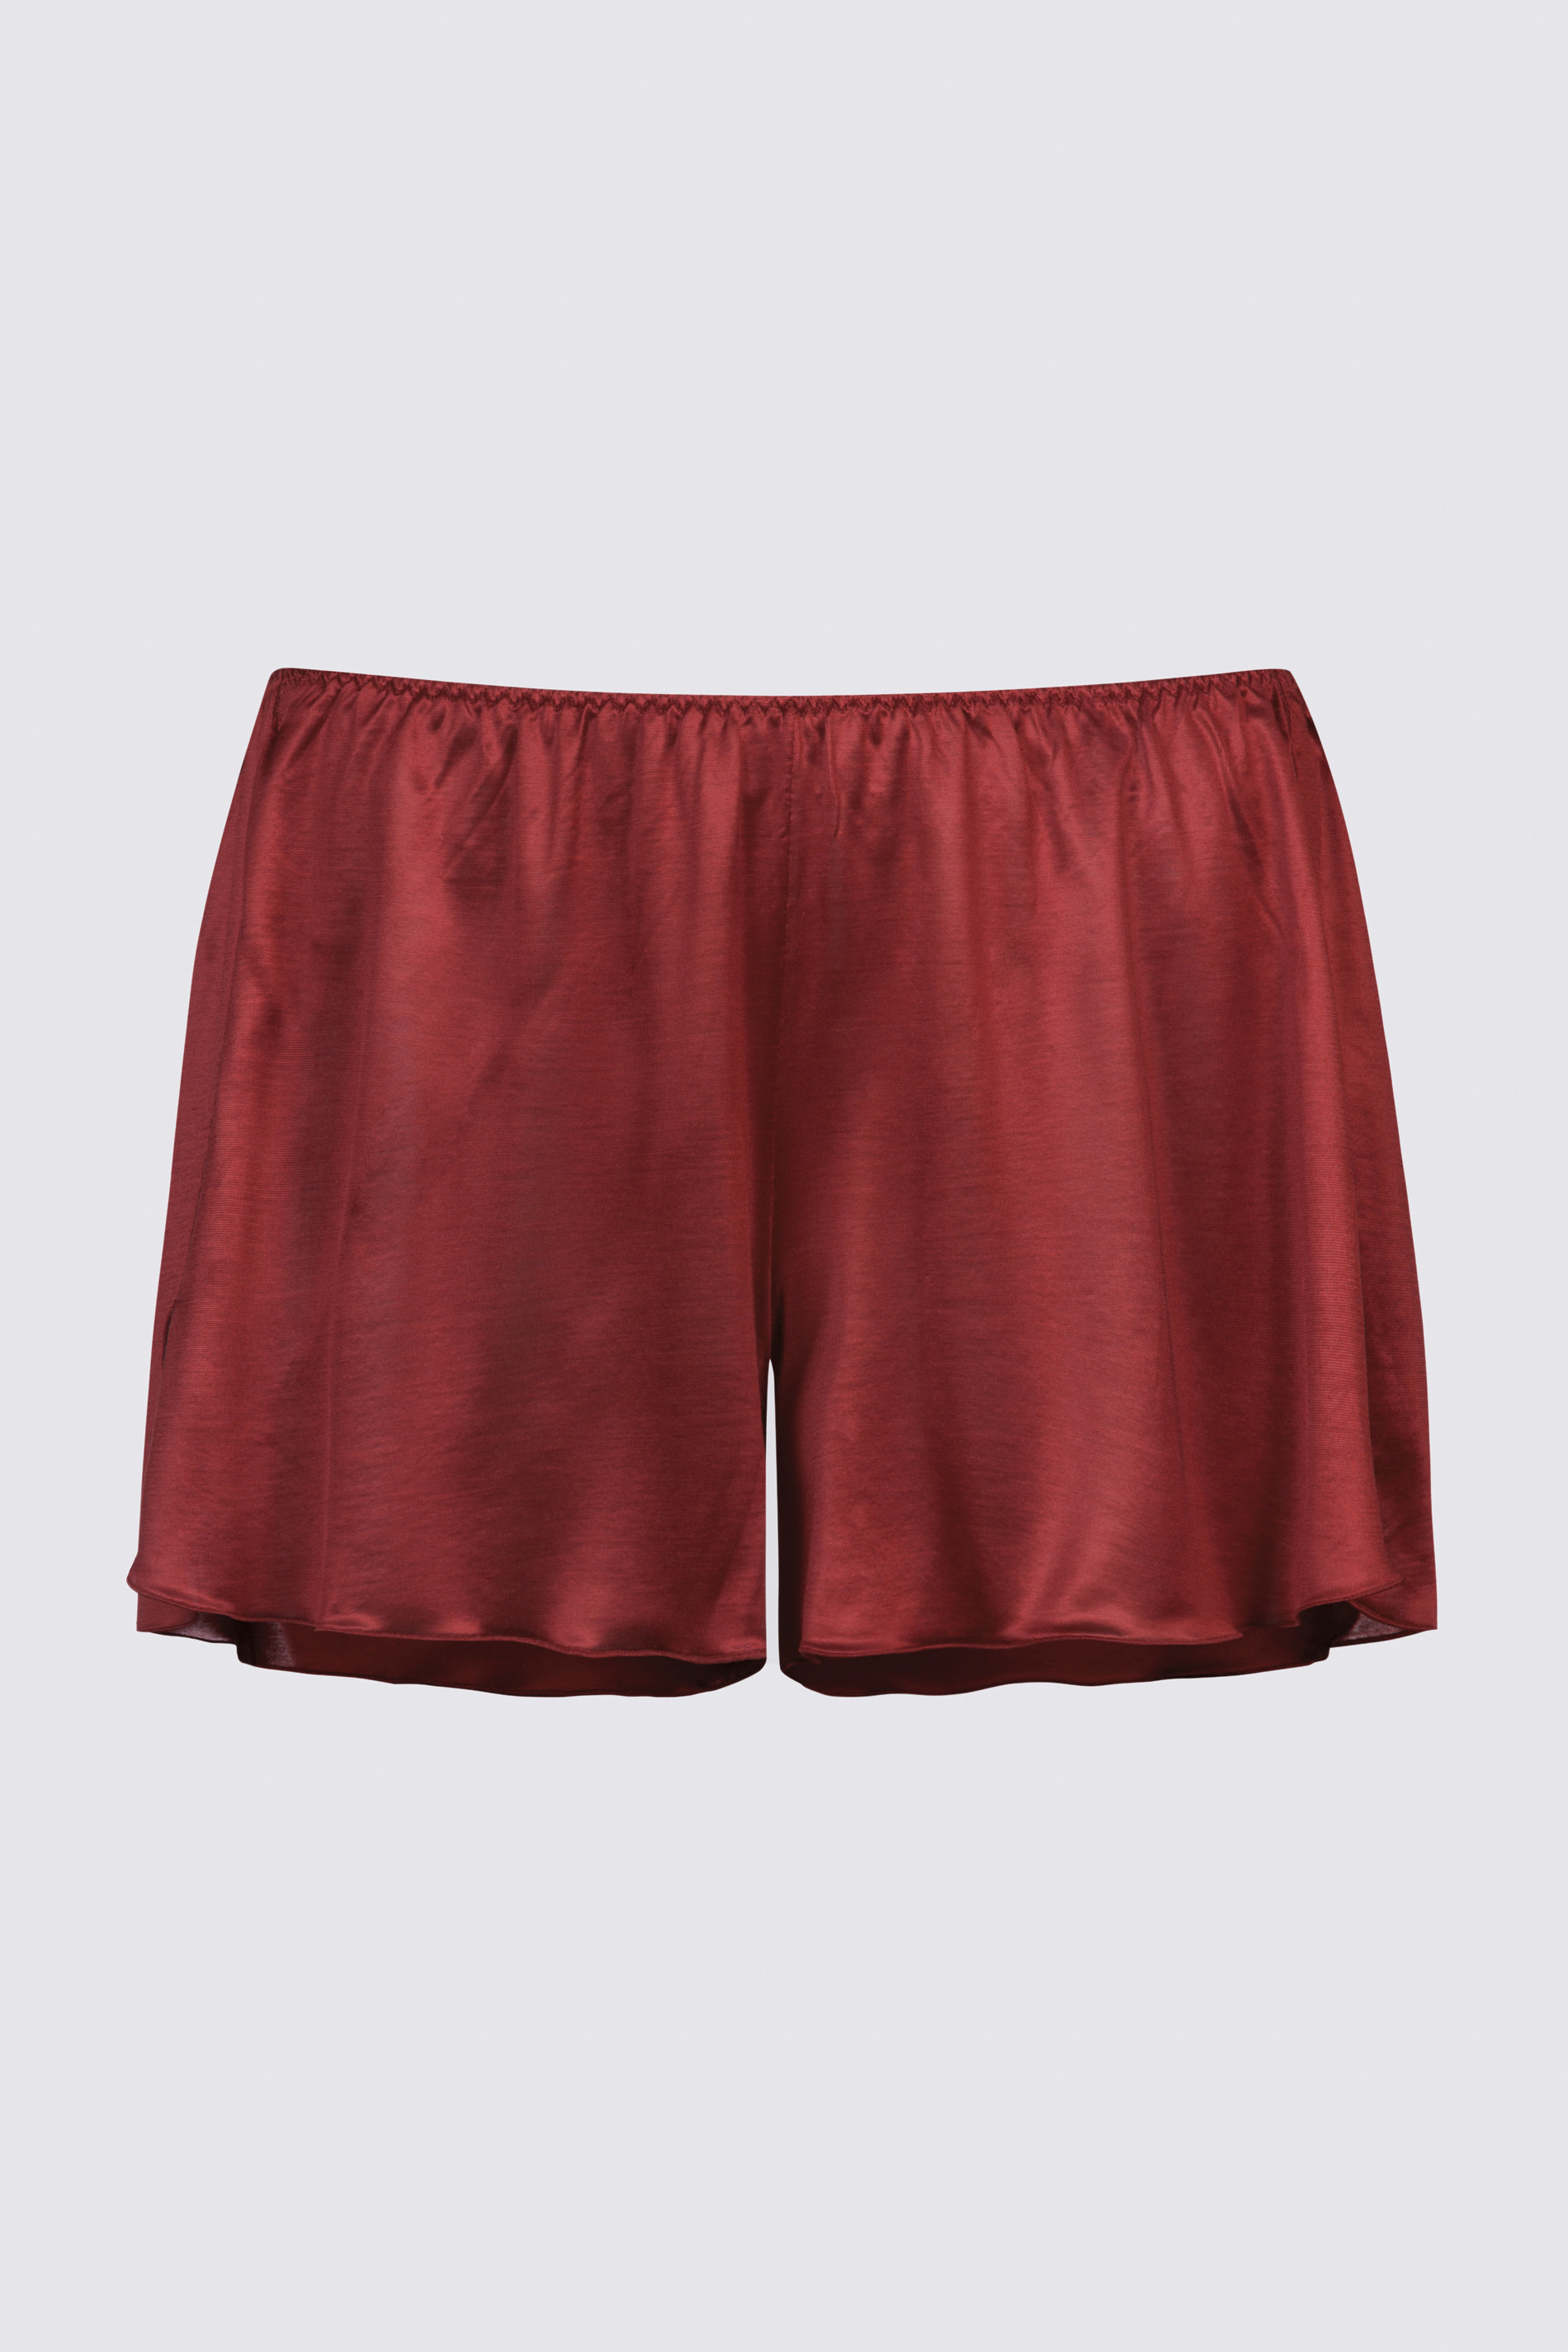 French knicker Red Pepper Serie Coco Uitknippen | mey®